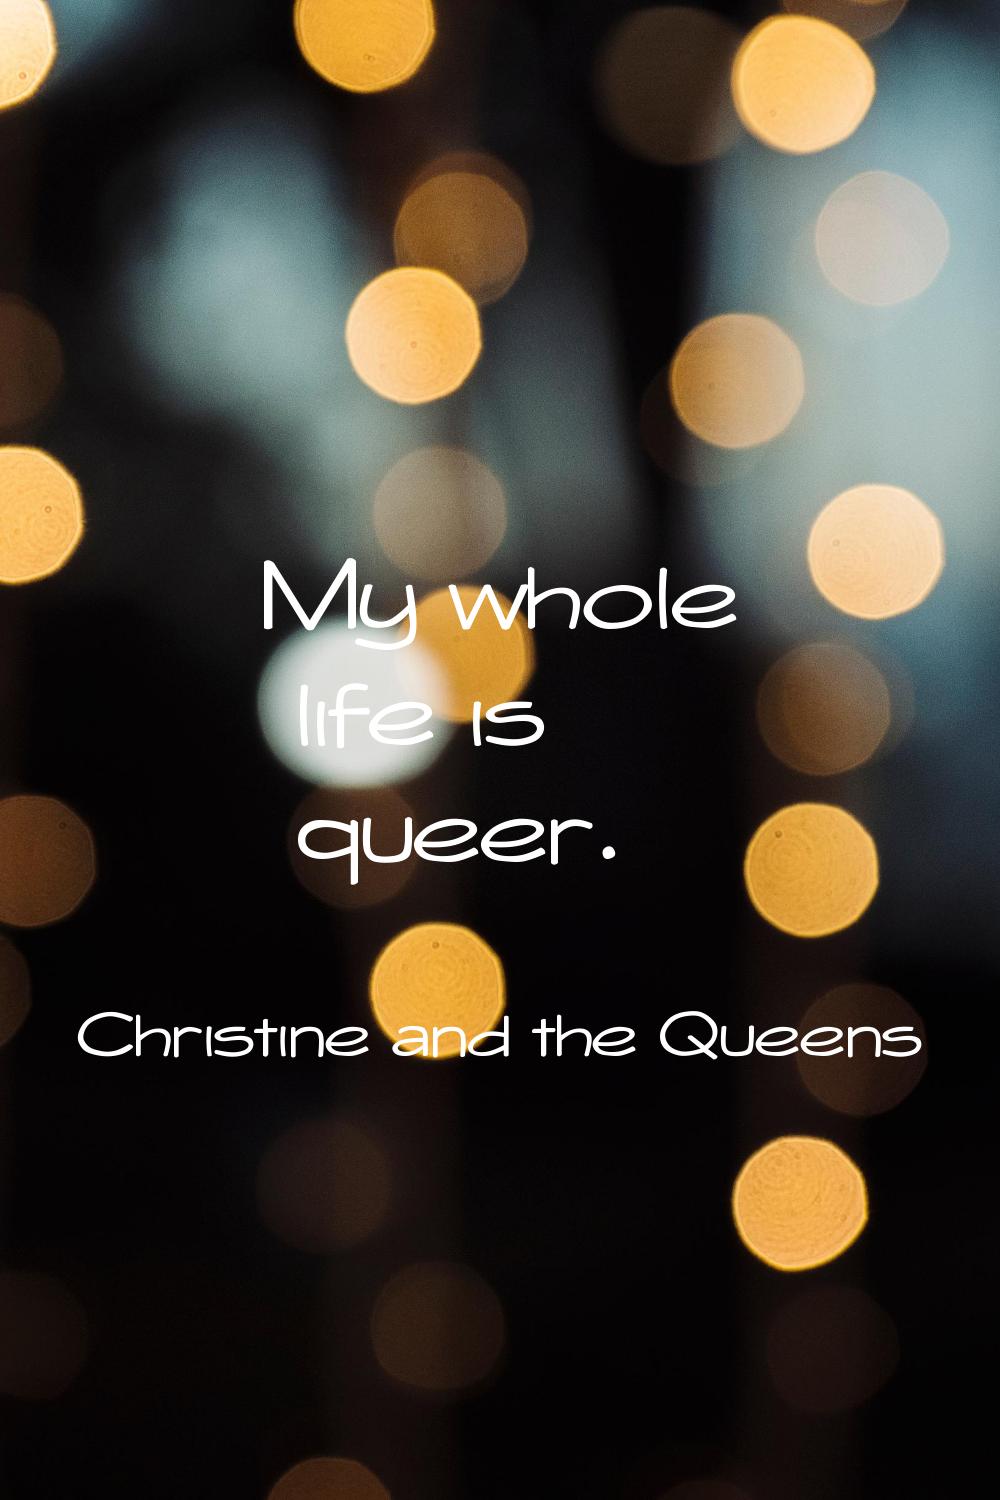 My whole life is queer.